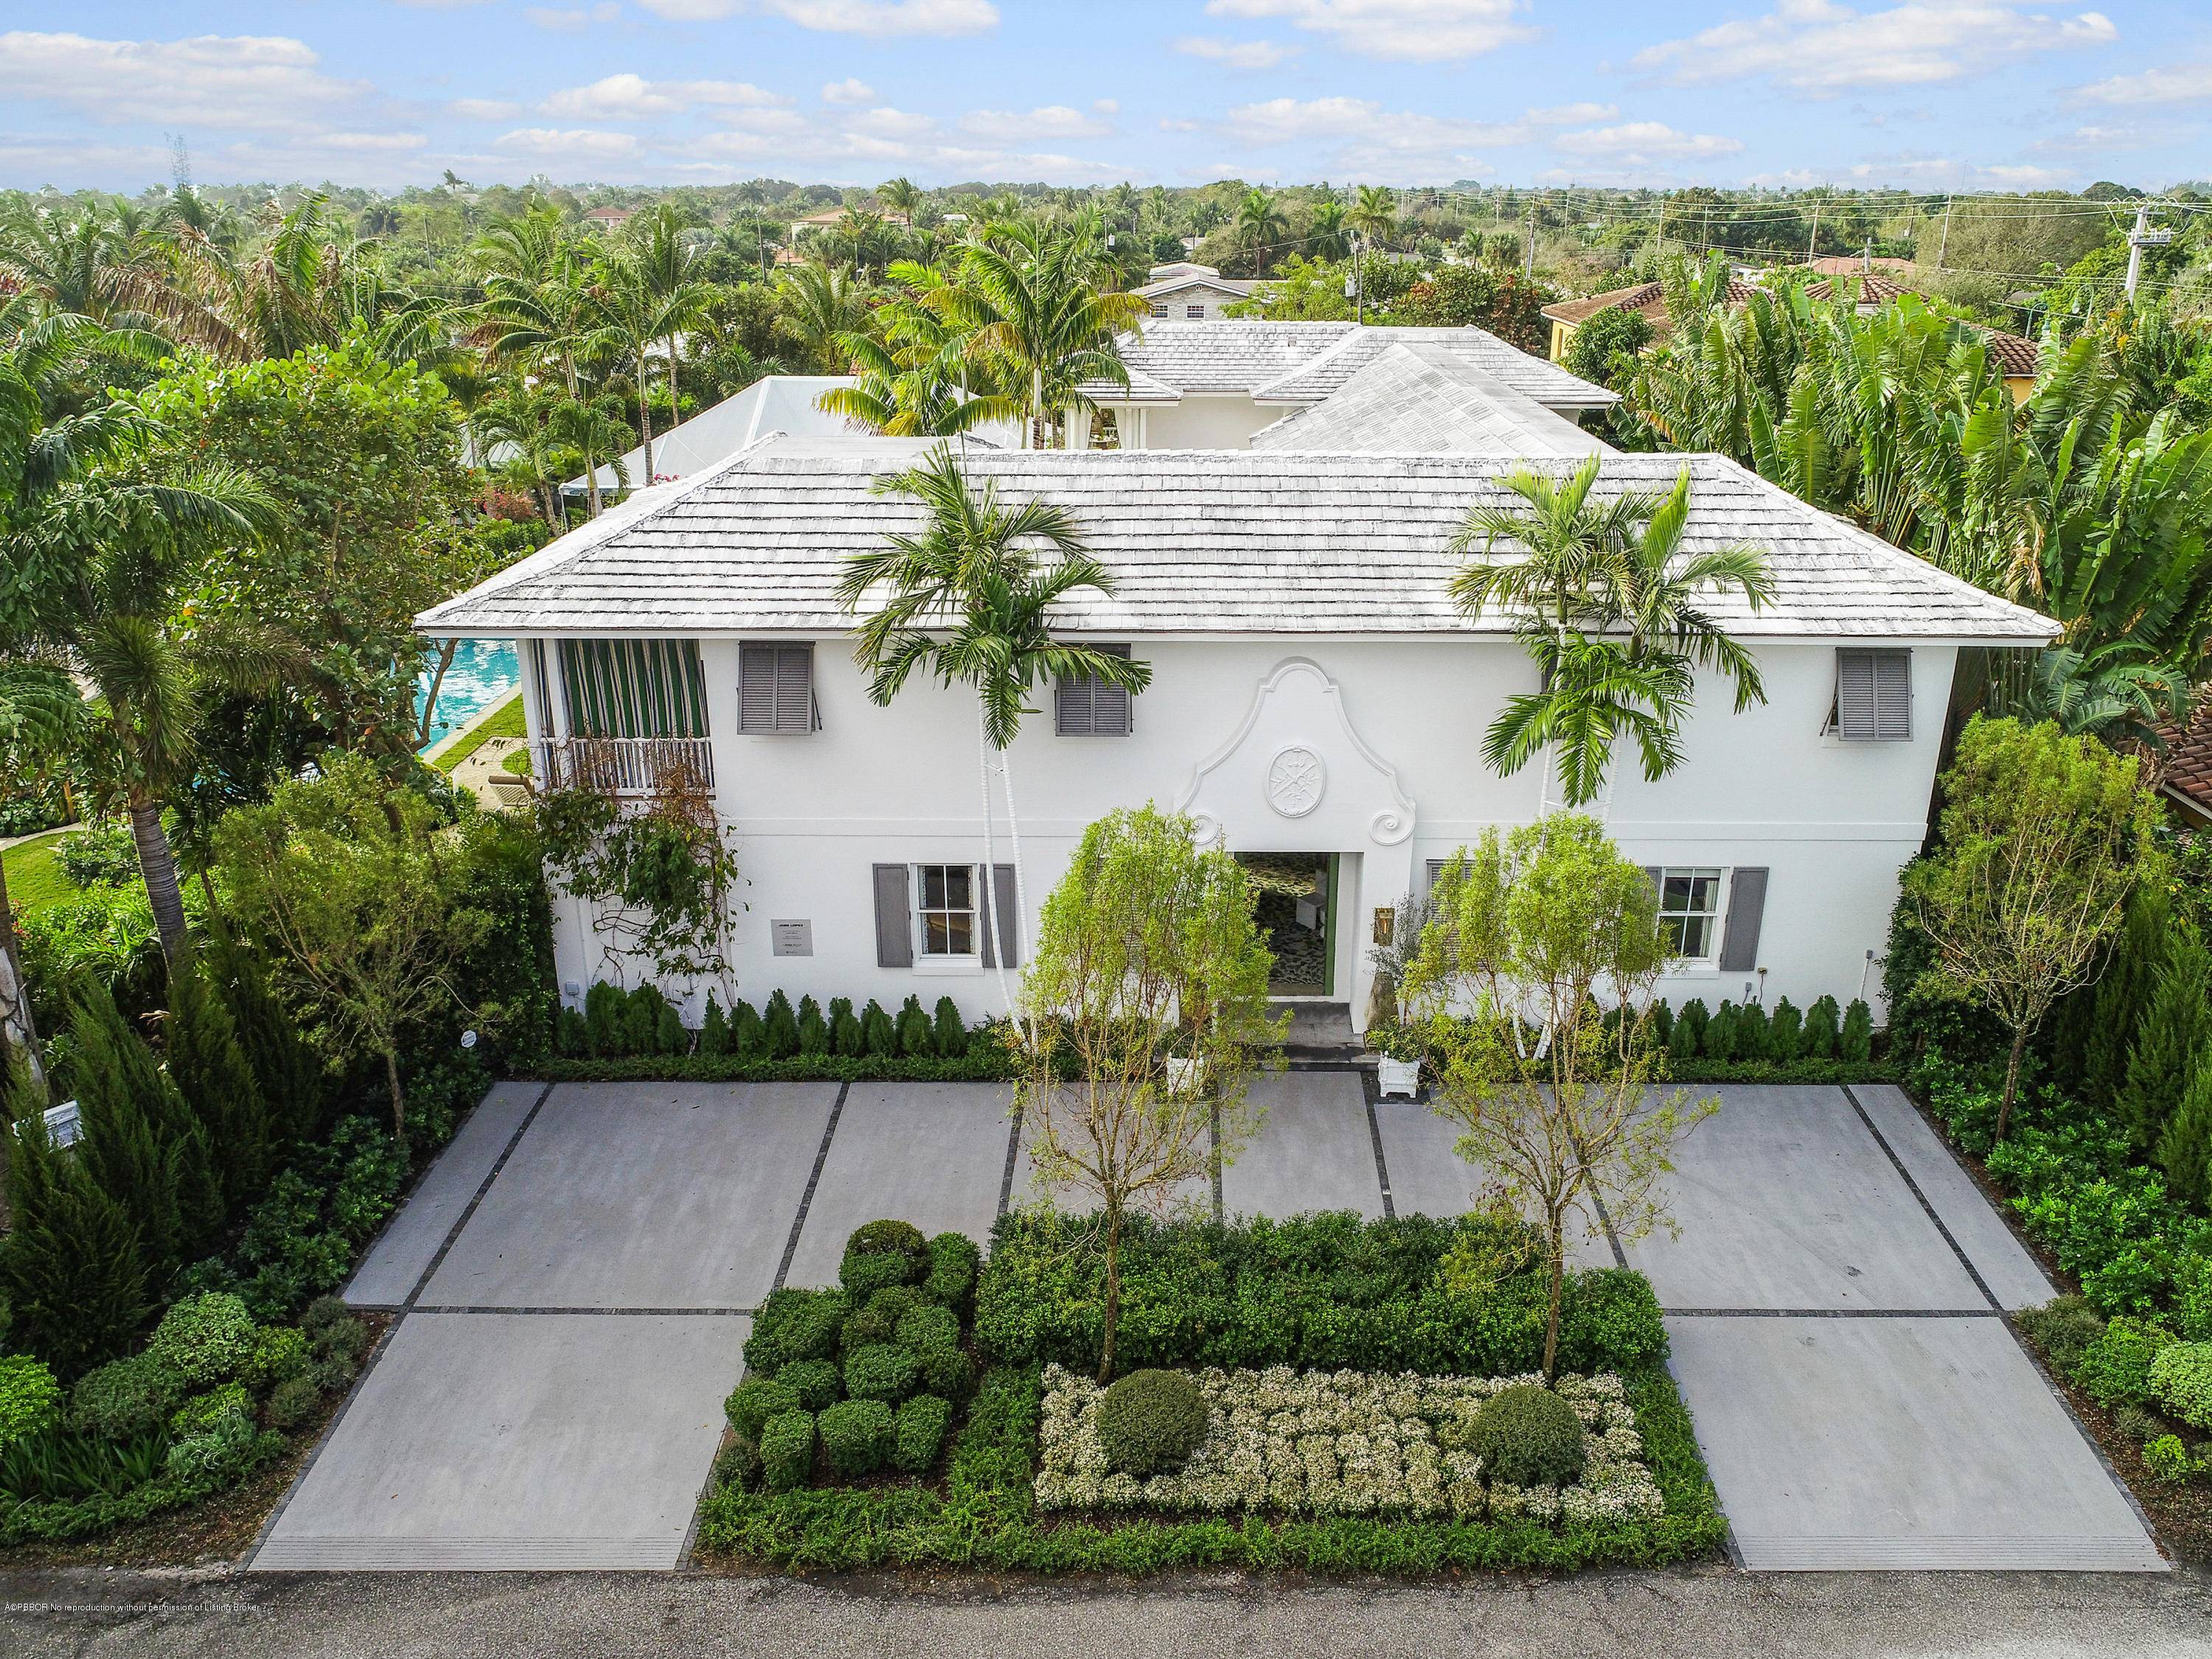 The house called Bamboo Hill and designed by Lars Bolander was chosen as the 2020 Palm Beach show house by the Kips Bay Boys and Girls Club and has roared ...